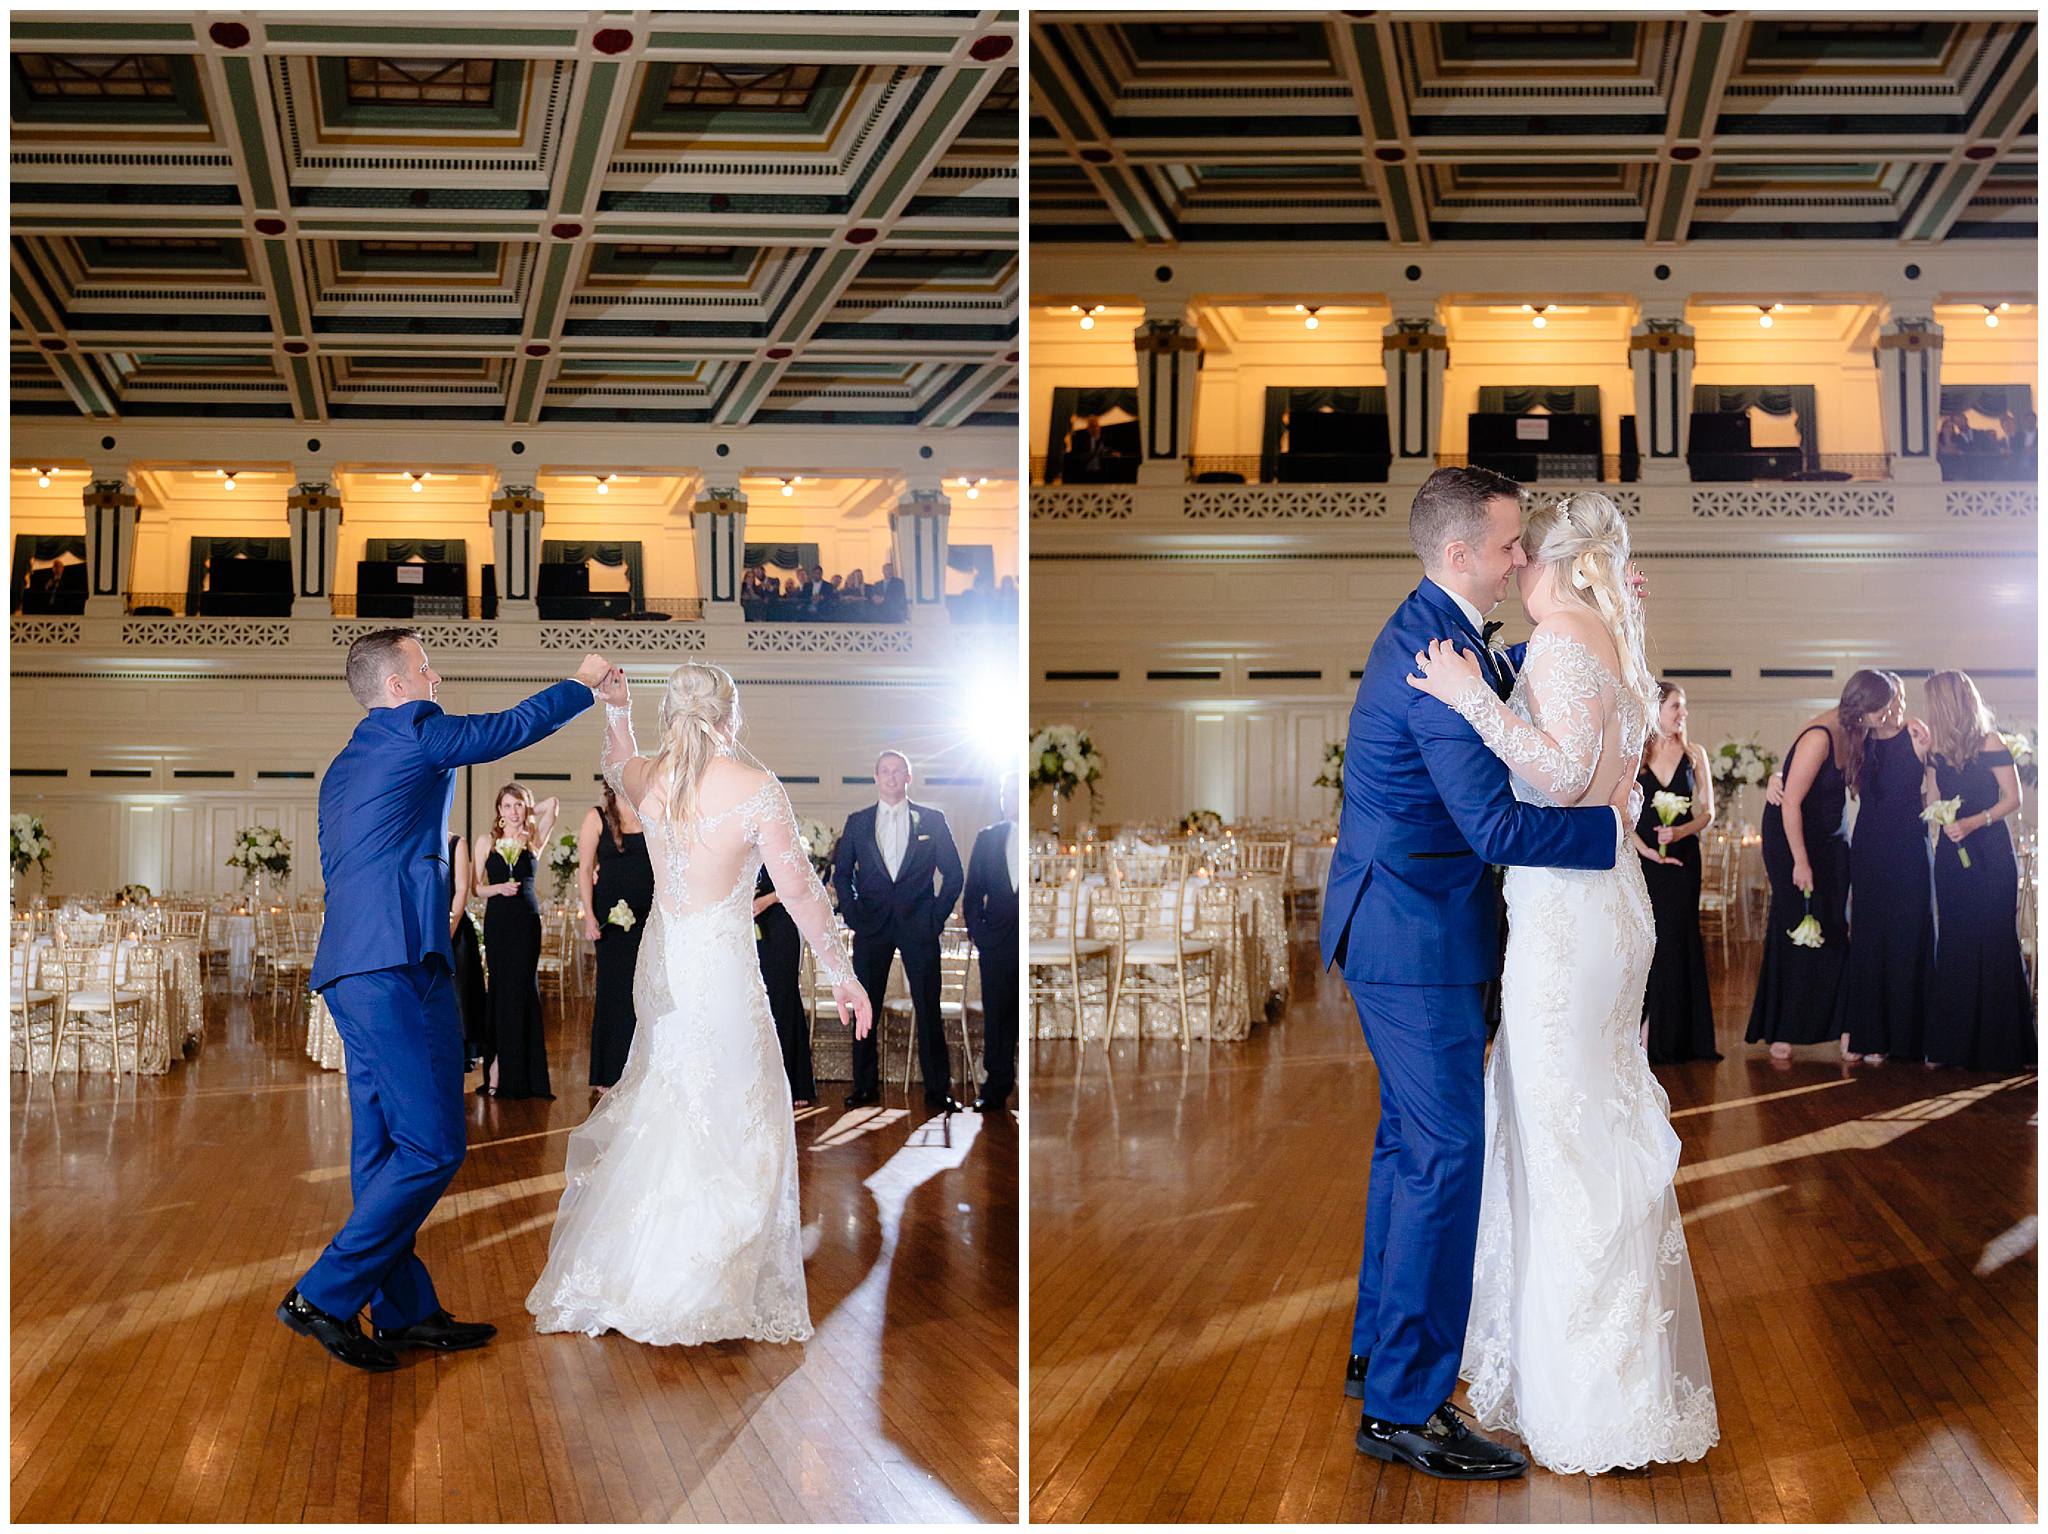 Newlyweds share their first dance at a Soldiers & Sailors wedding